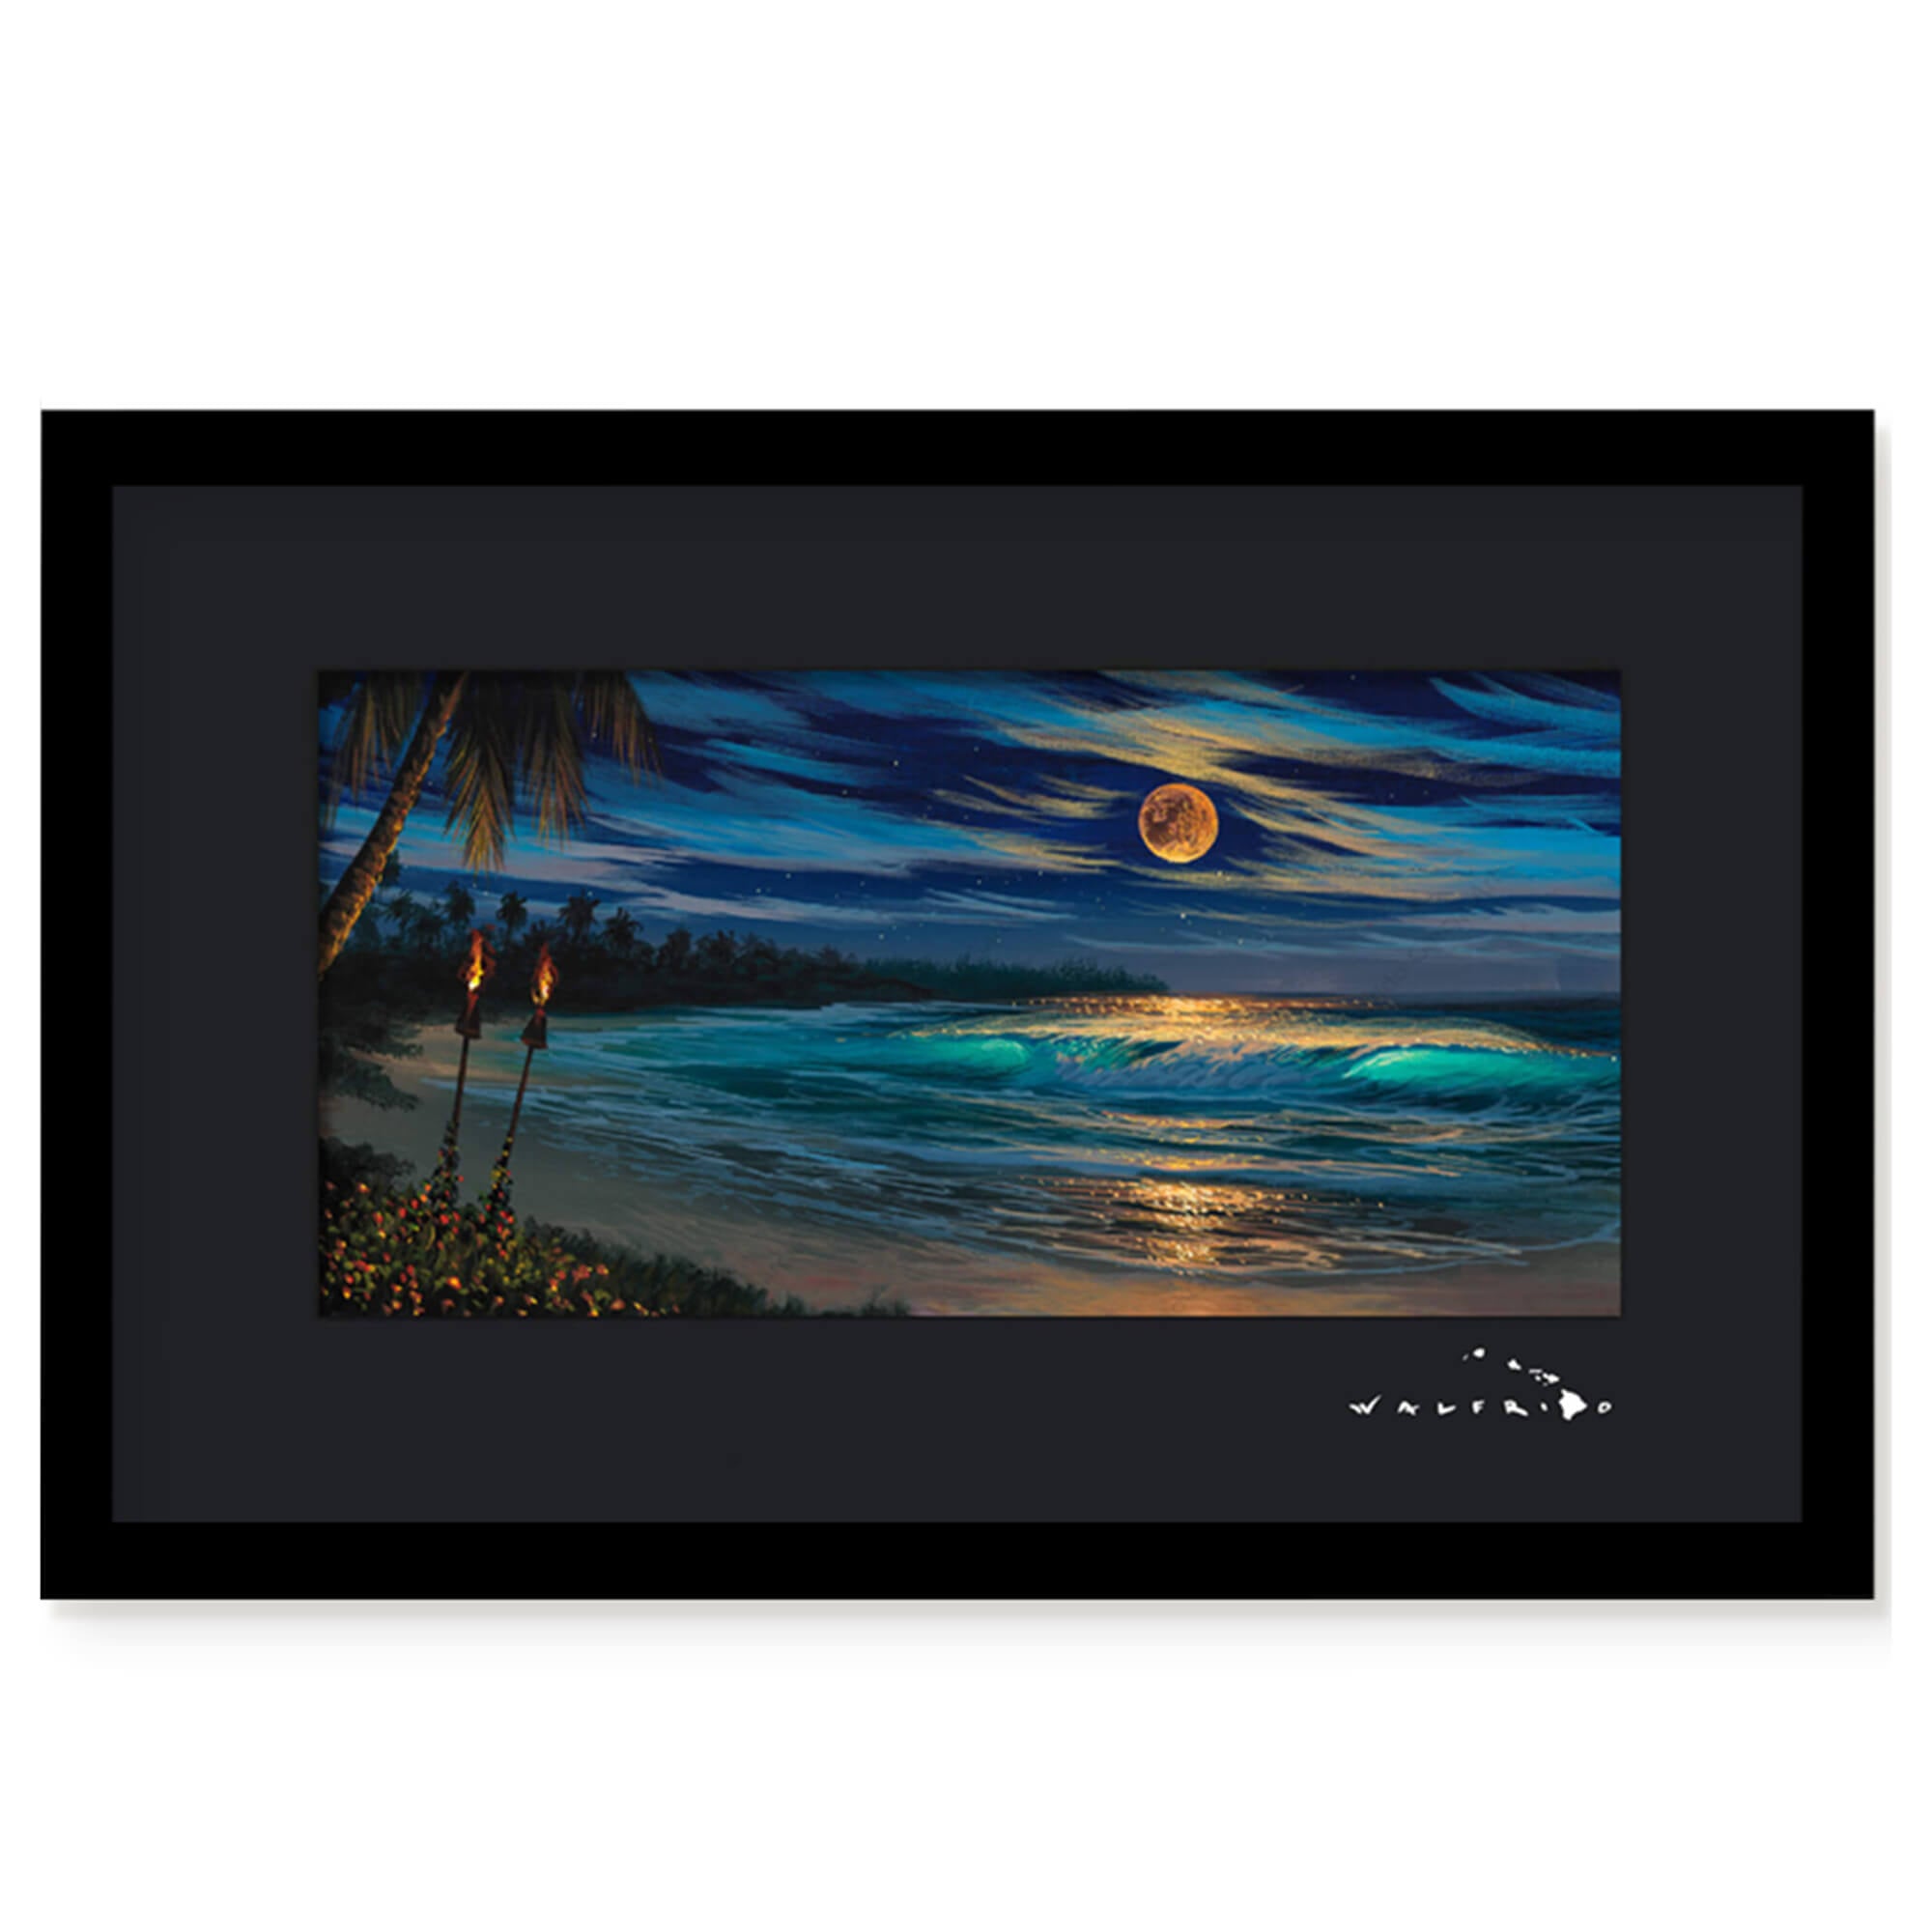 Framed matted art print of a romantic night view of the ocean with a full moon, star-filled sky, and tiki torches by Hawaii artist Walfrido Garcia